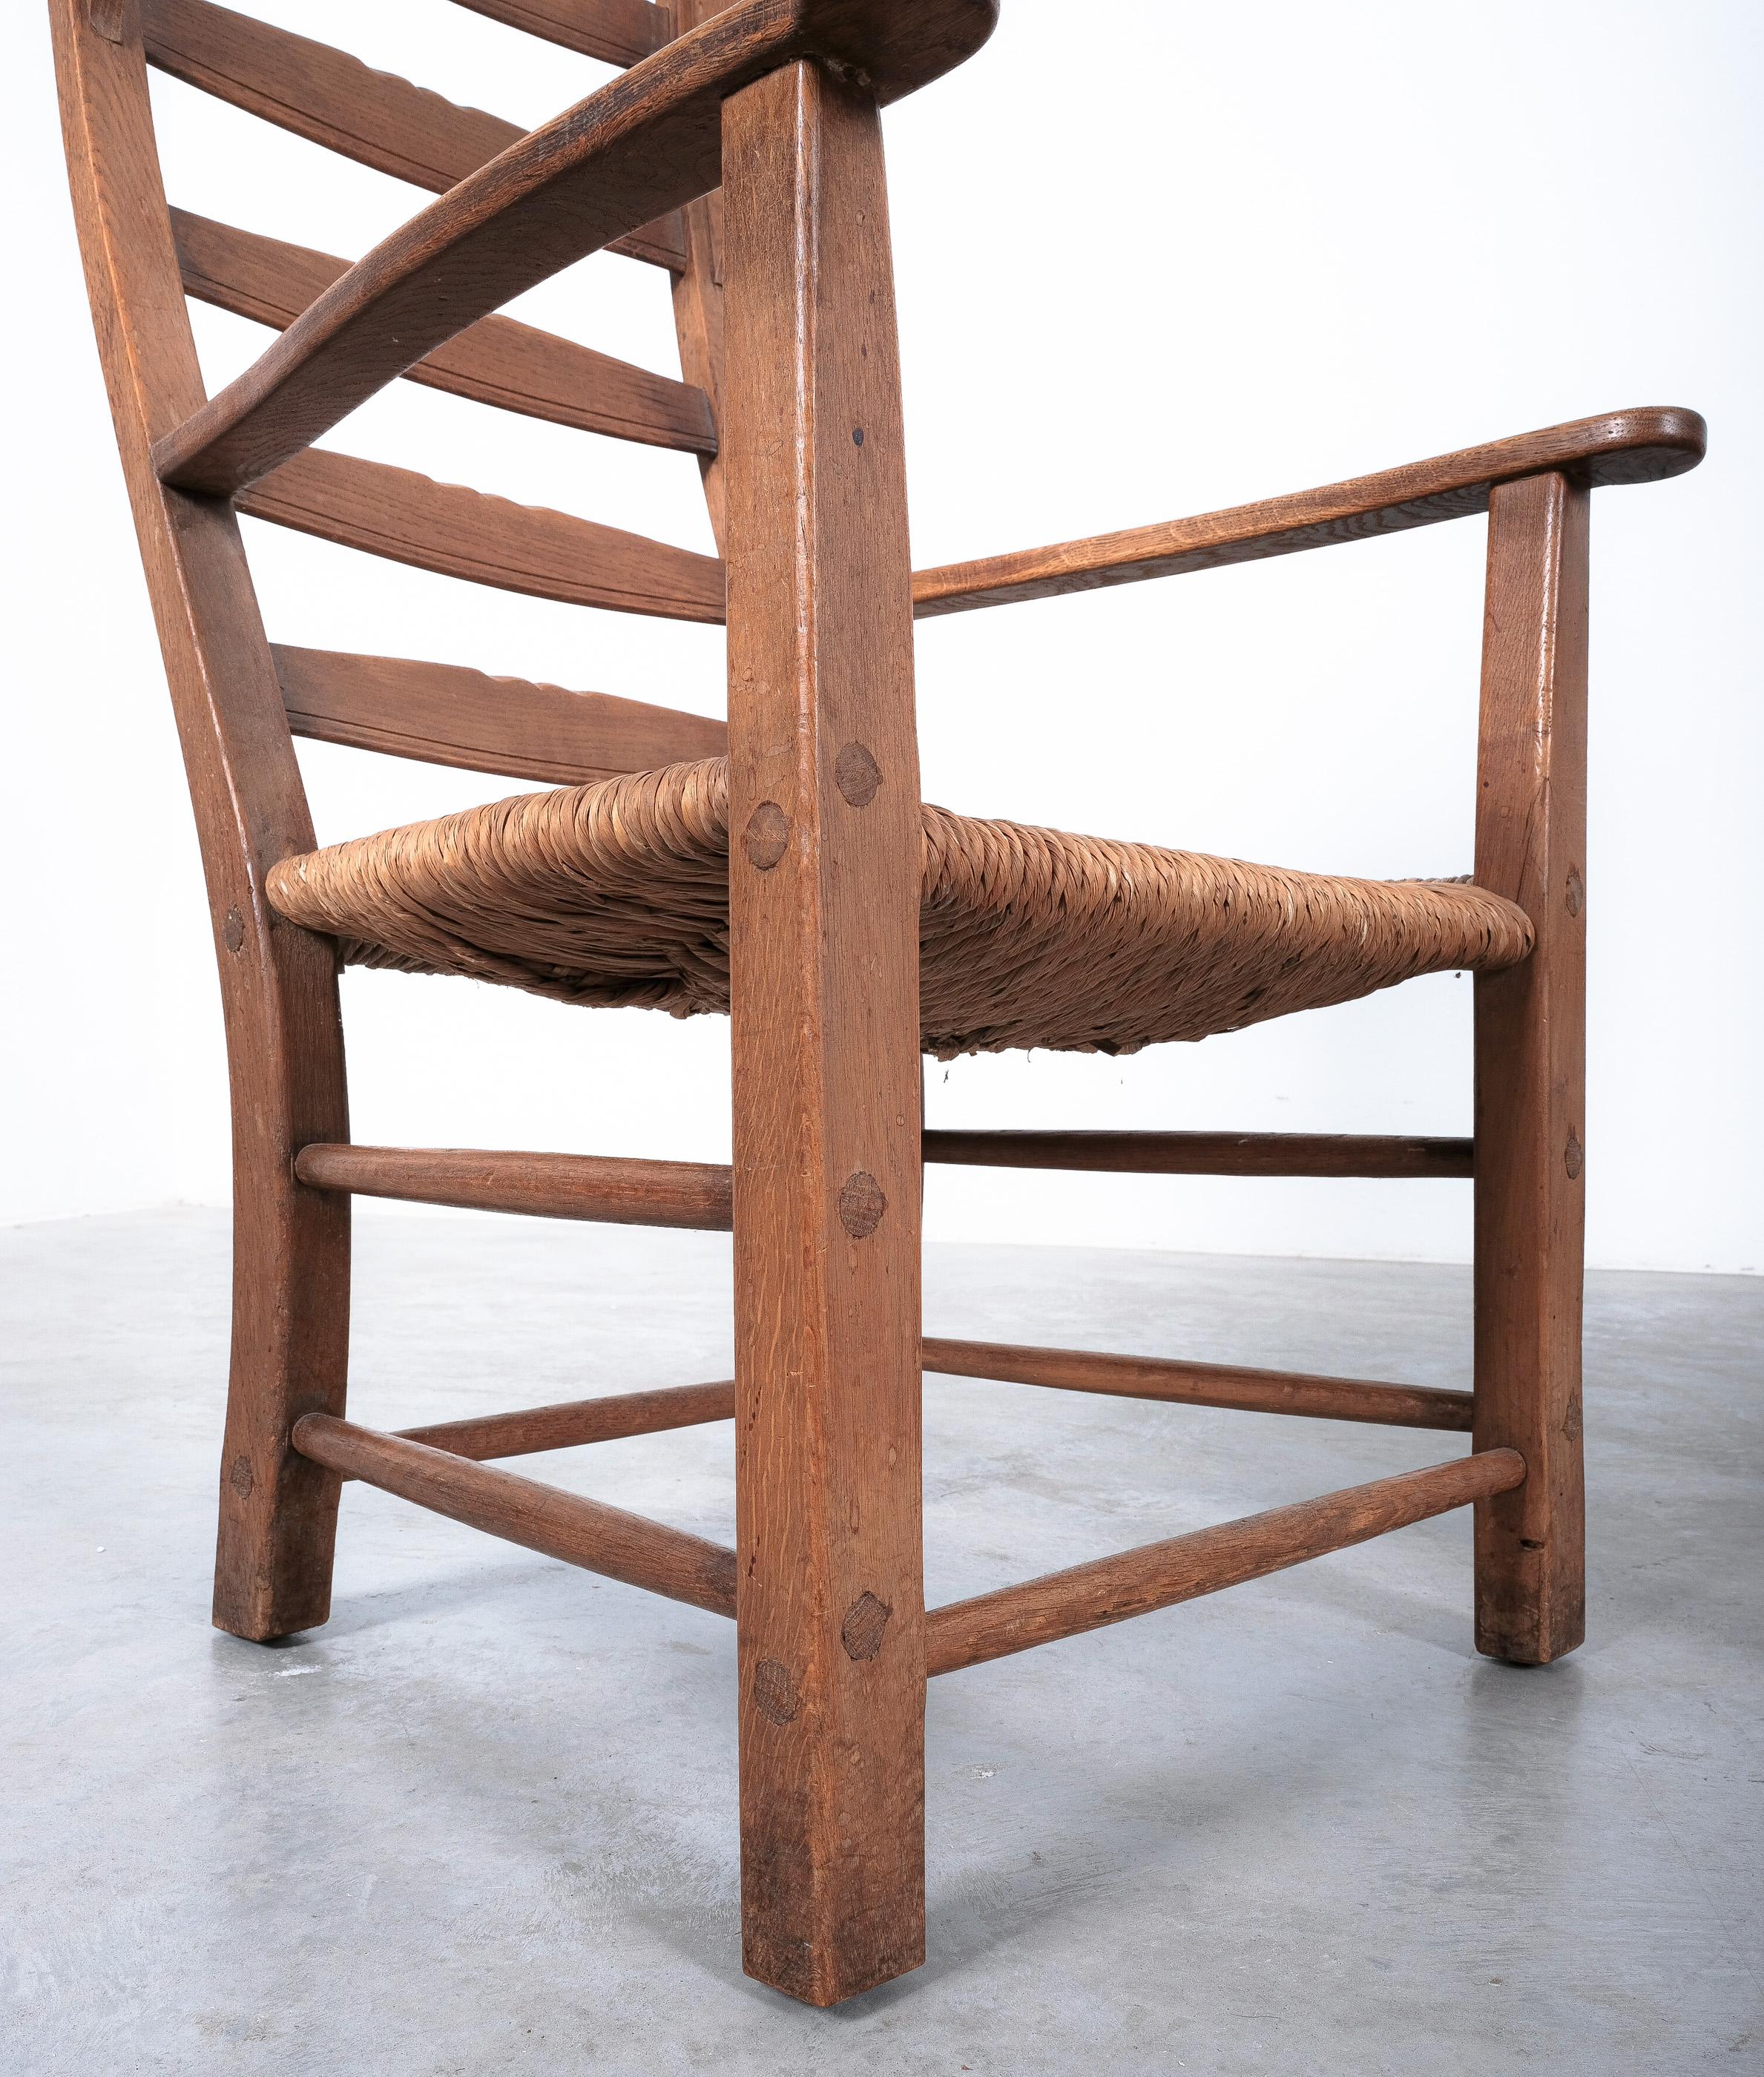 Pair of Rustic Rope Lounge Chairs Beech Wood, France, 1950 For Sale 3